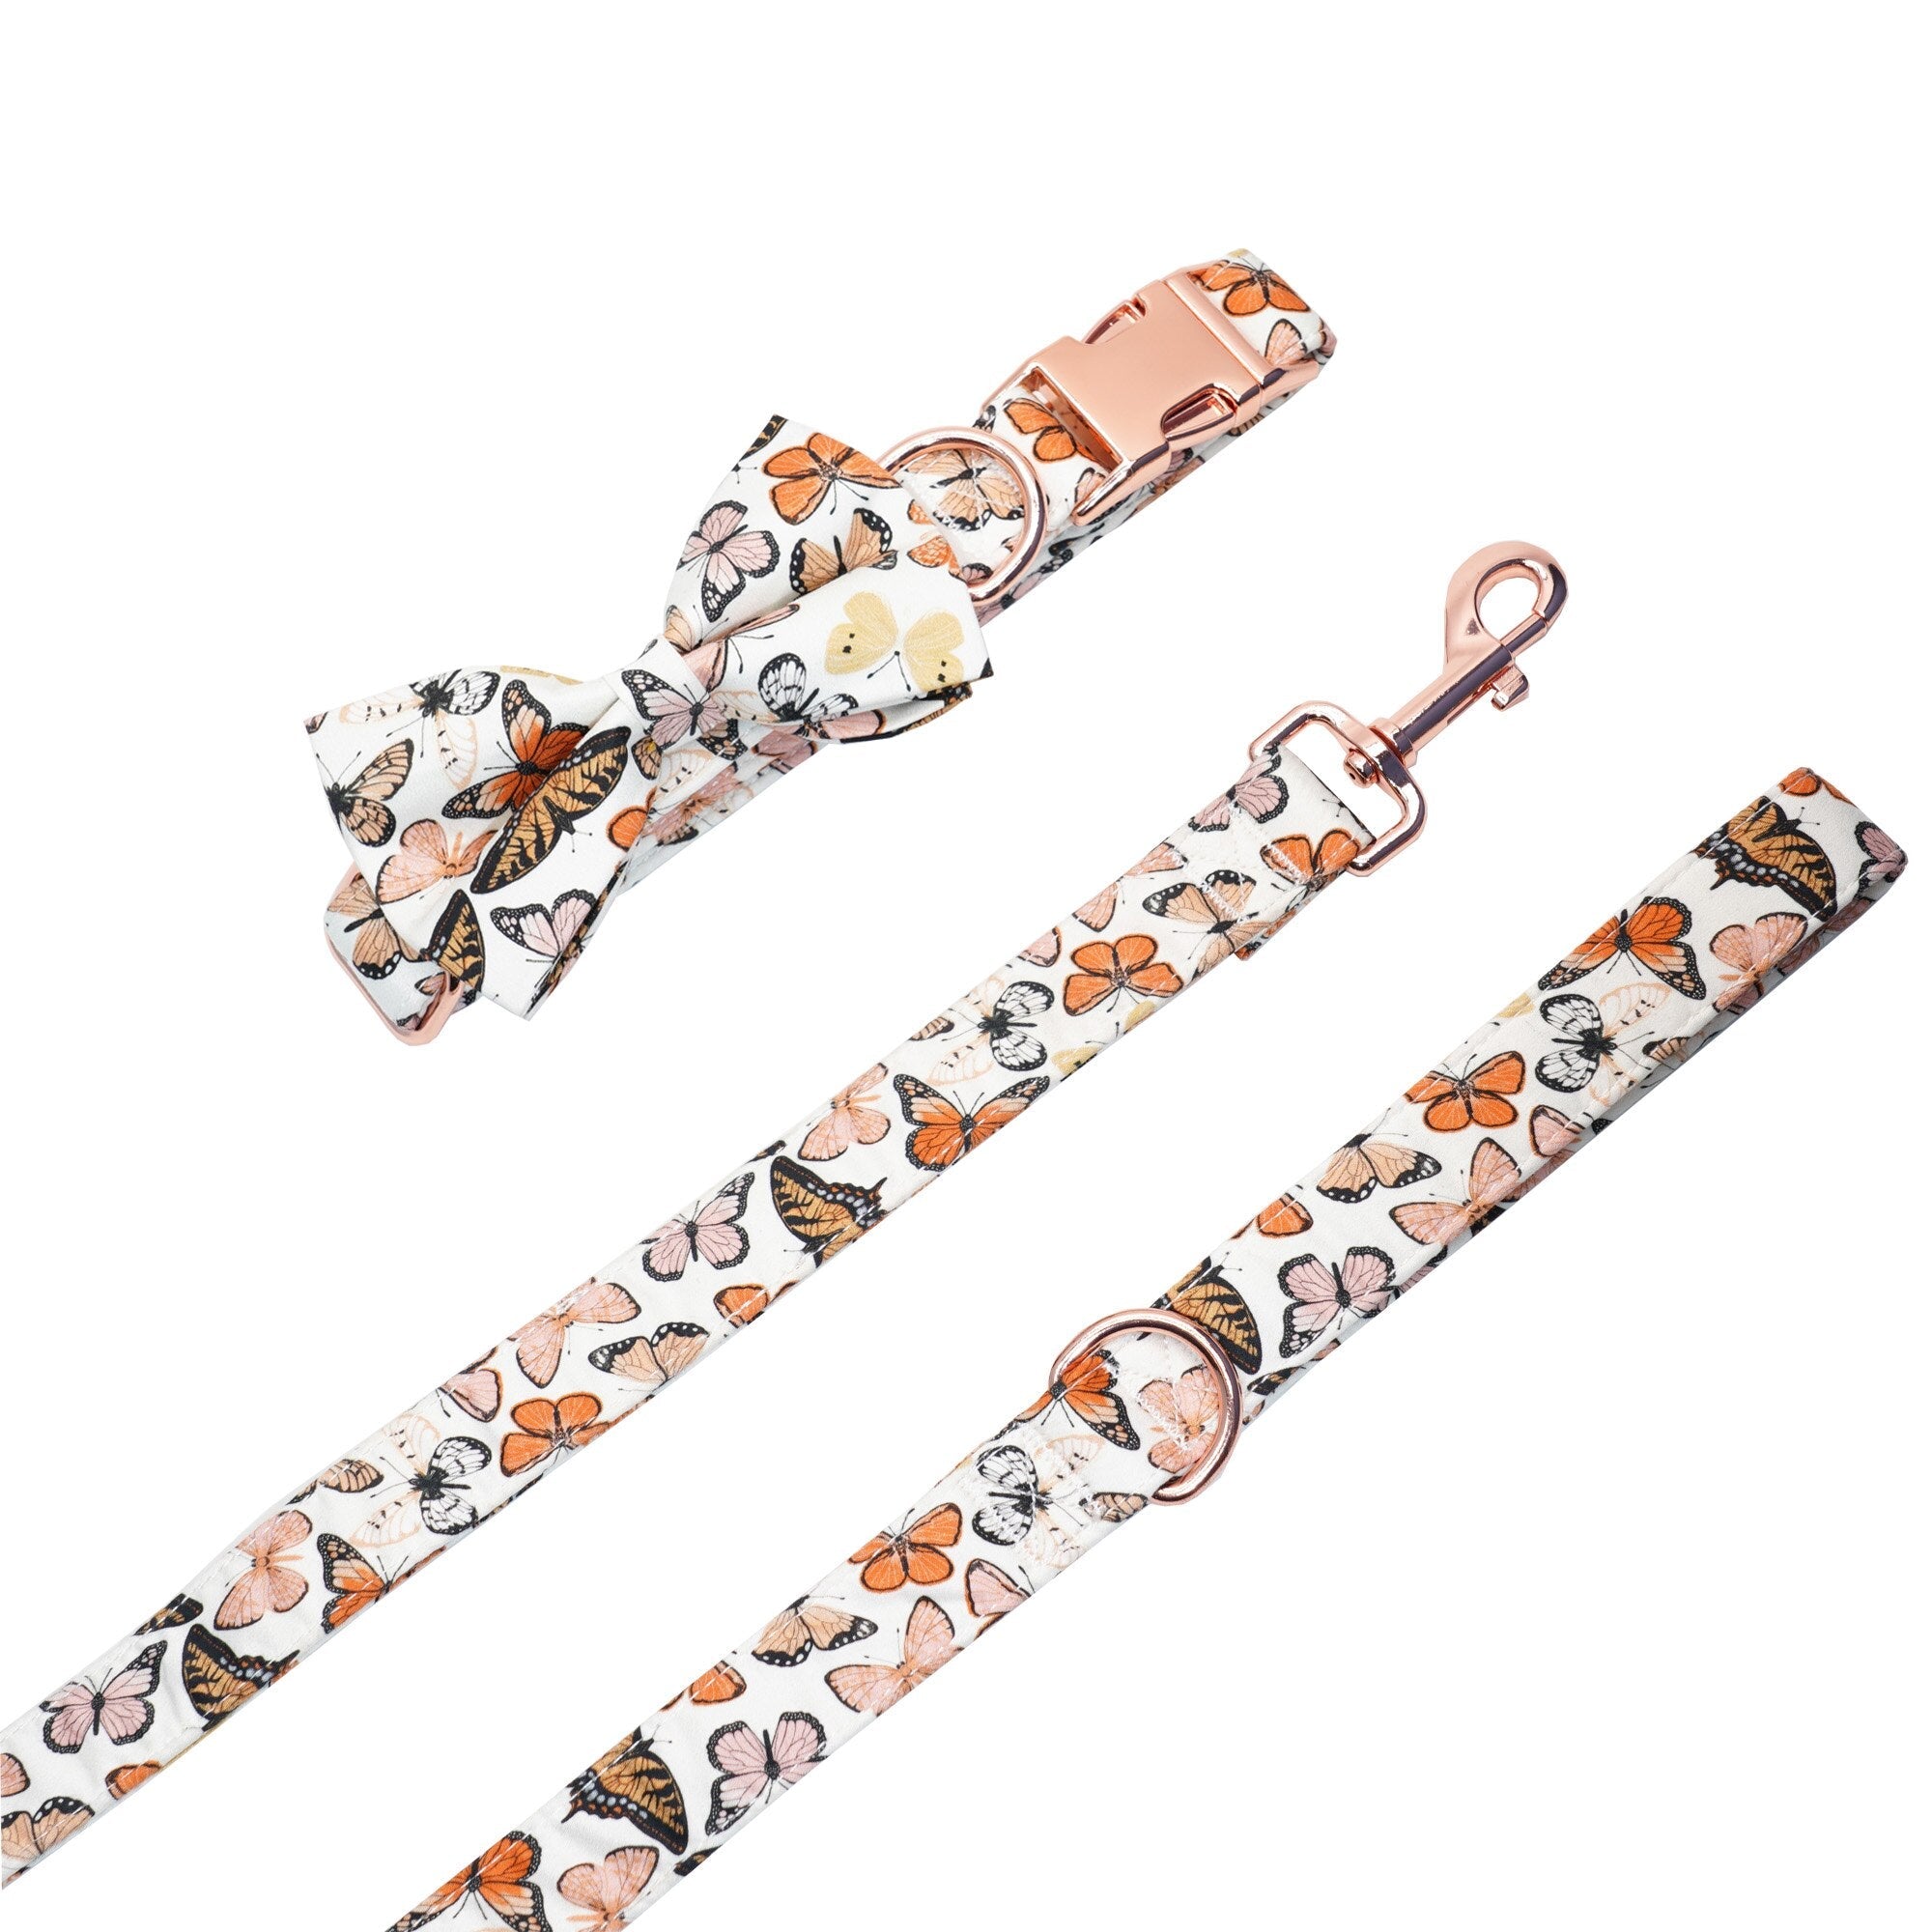 Breezy Butterflies: Personalized Bow collar And Leash Set. - CurliTail